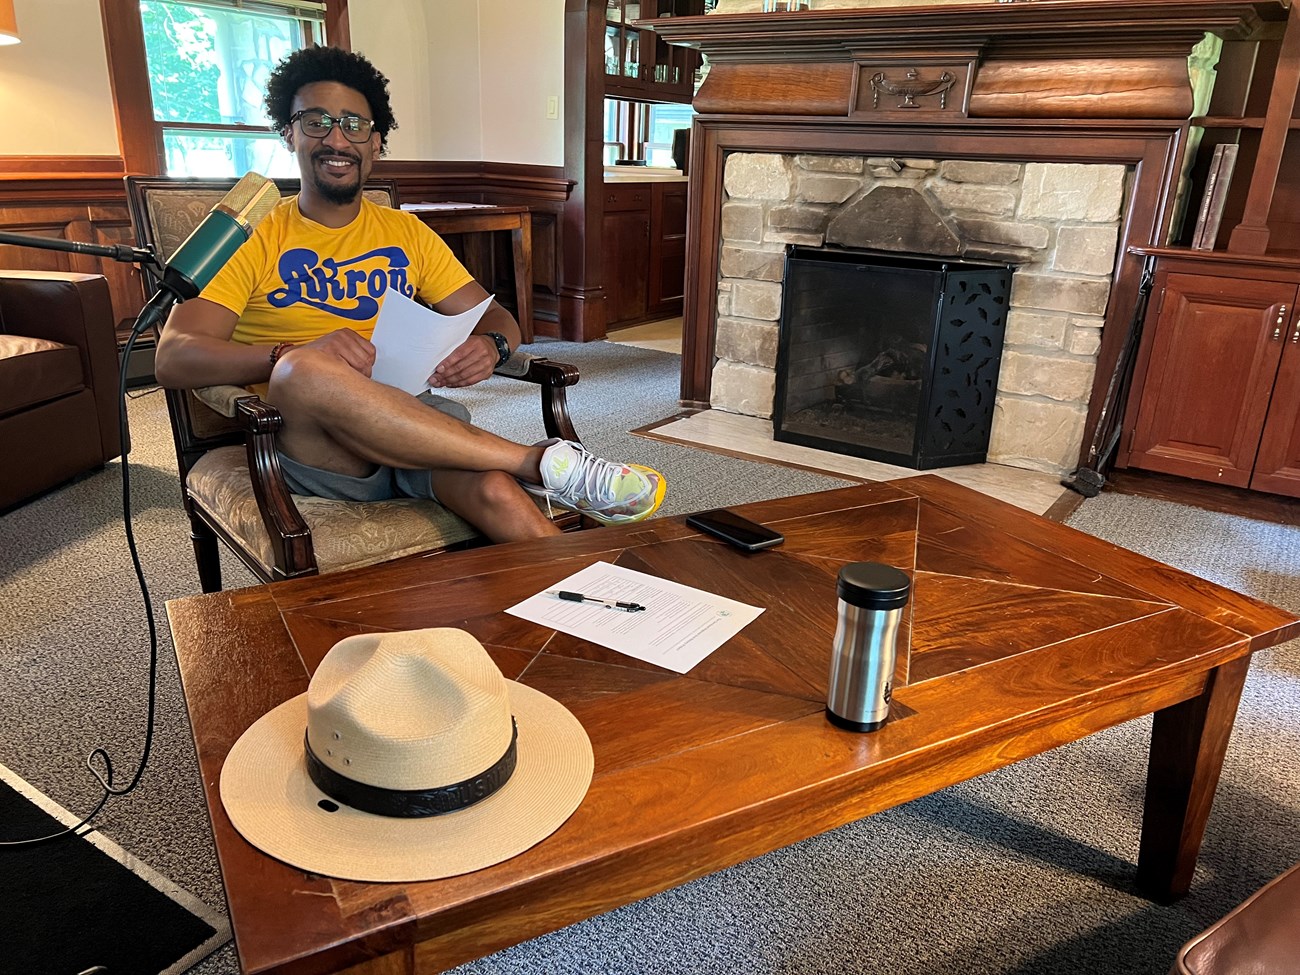 A Black man sits behind a microphone, a stone fireplace to the right. He has a short afro and beard, wears glasses and a yellow and blue Akron shirt.